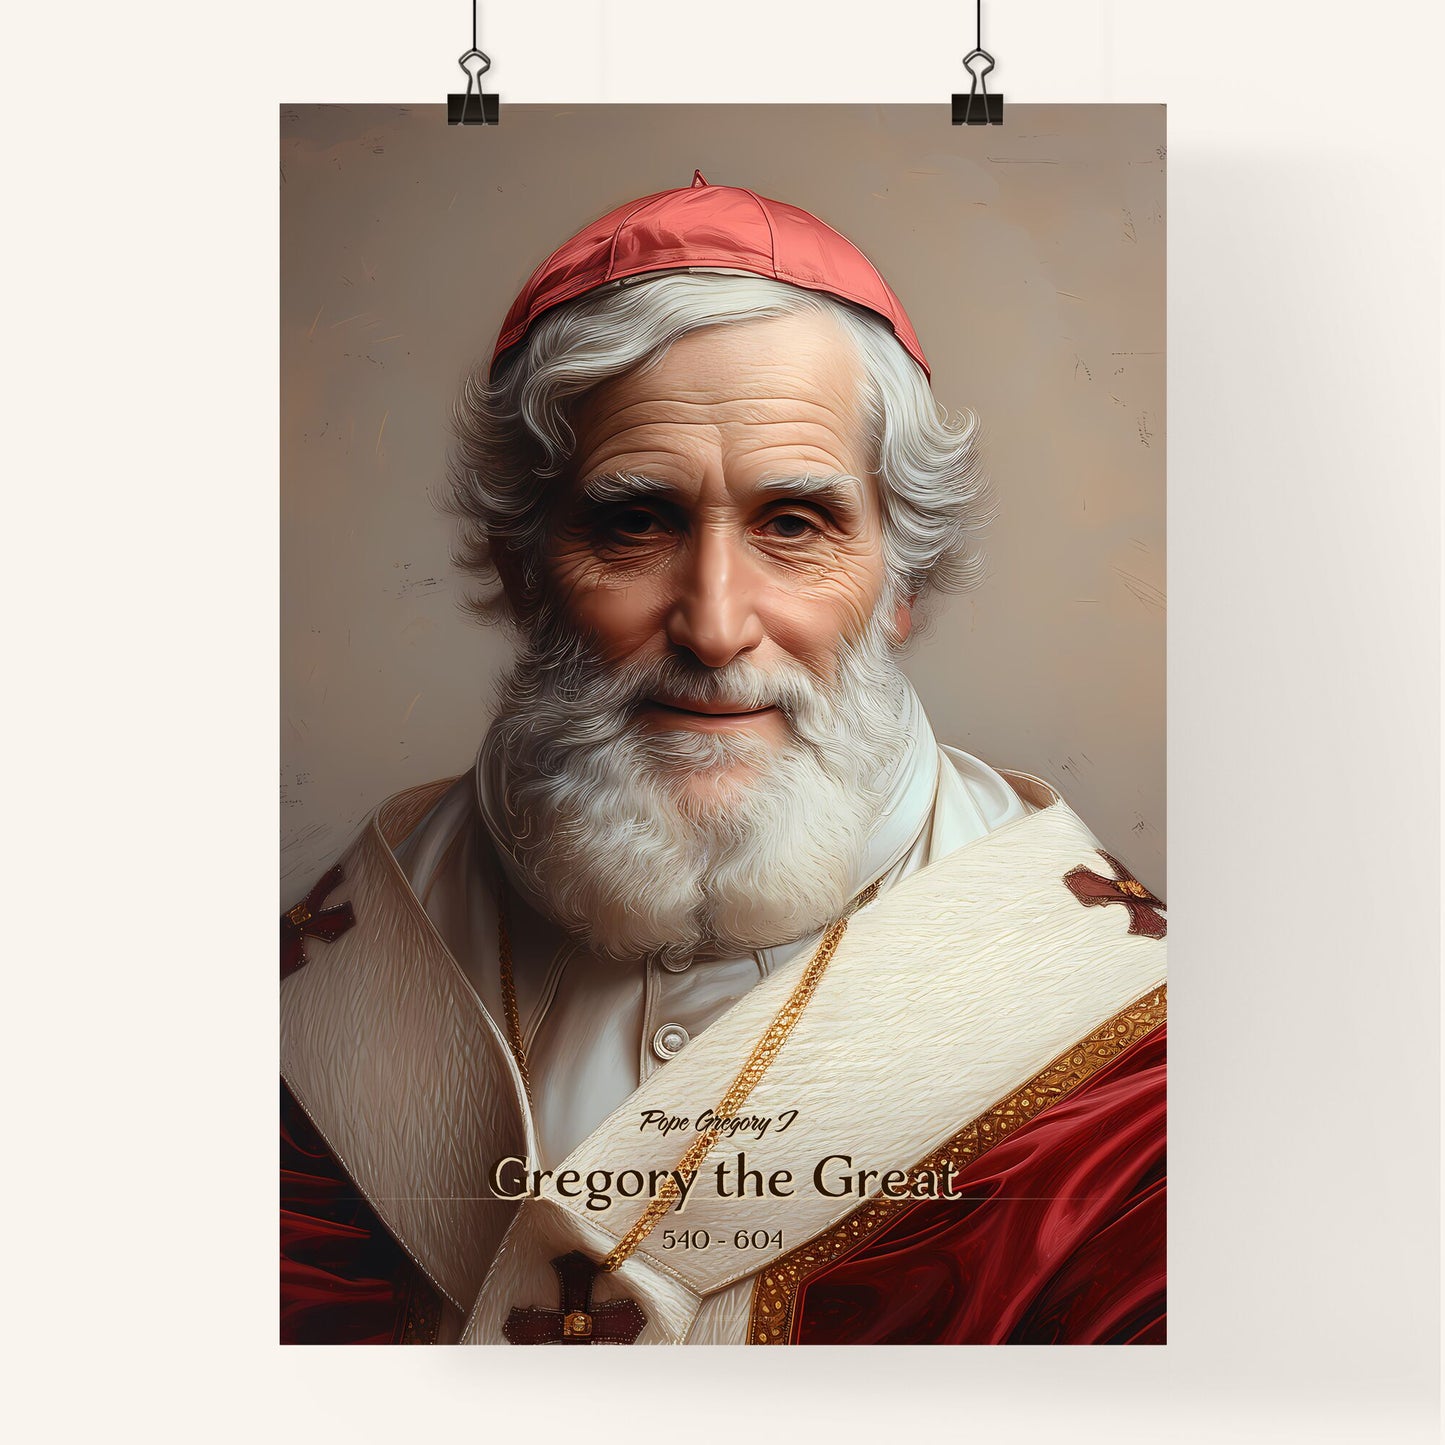 Pope Gregory I, Gregory the Great, 540 - 604, A Poster of a man in a red hat and robe Default Title